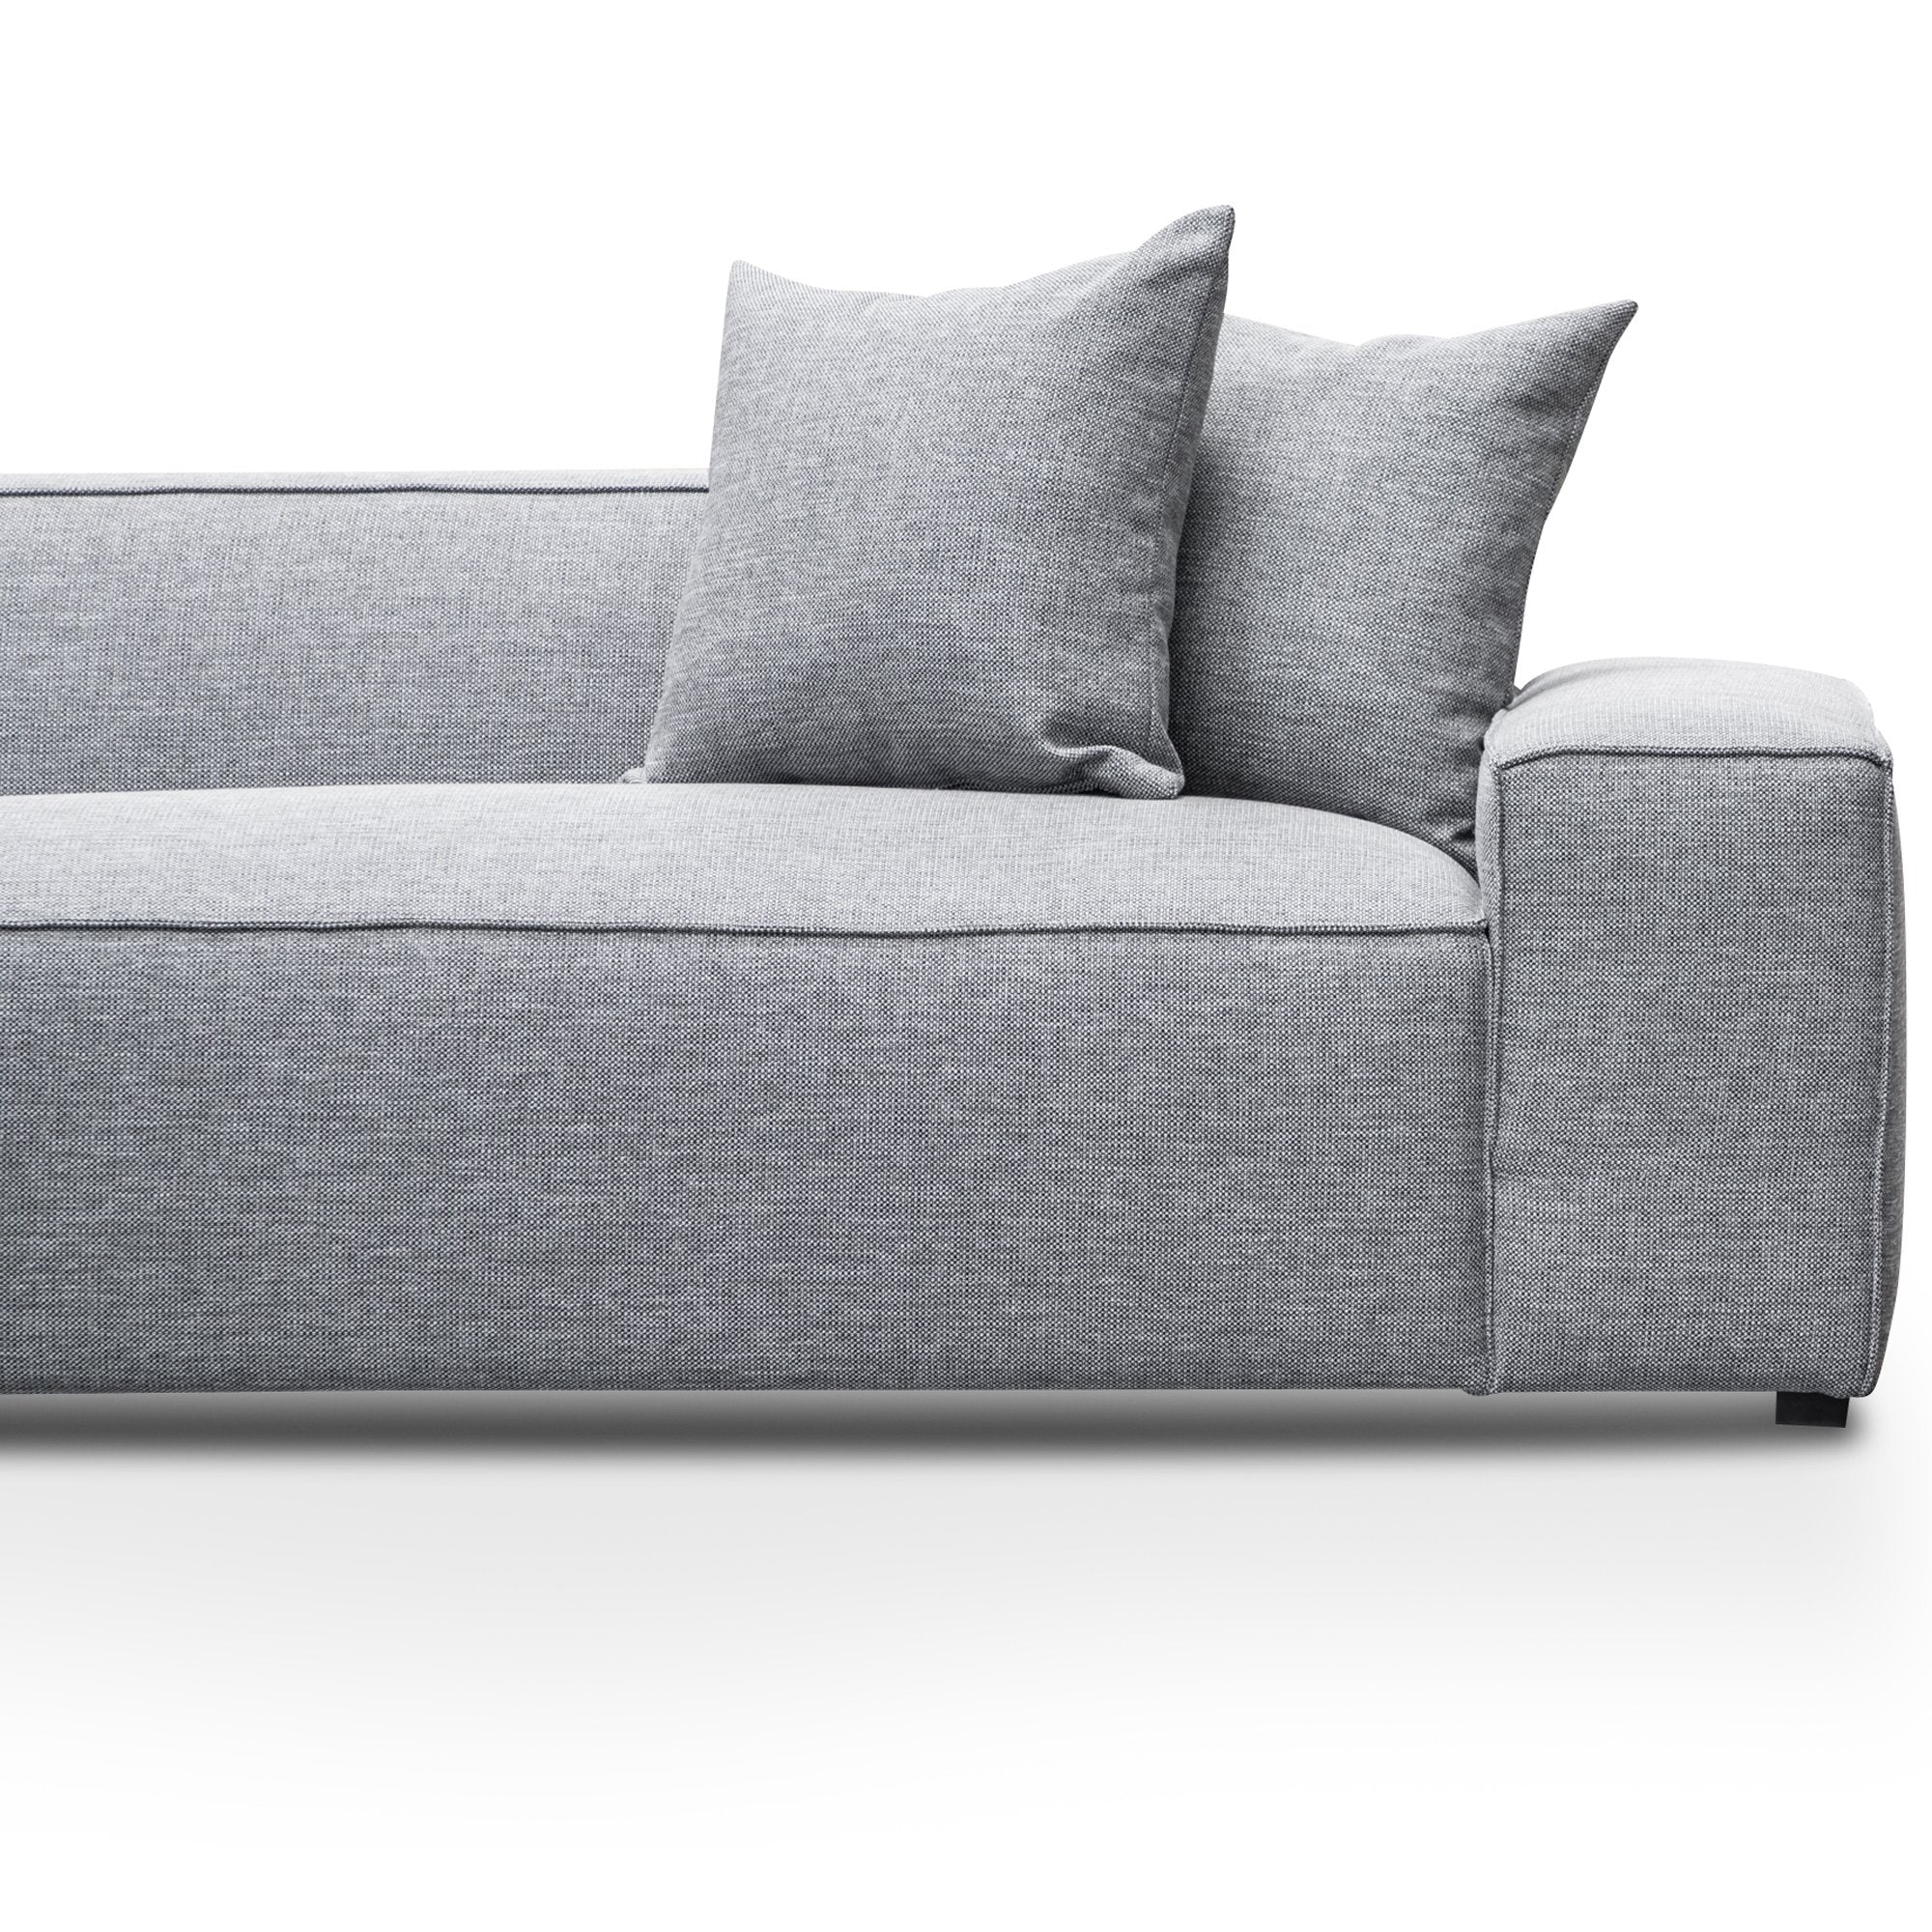 Charles 3S Left Chaise Sofa - Coin Grey - Sofas